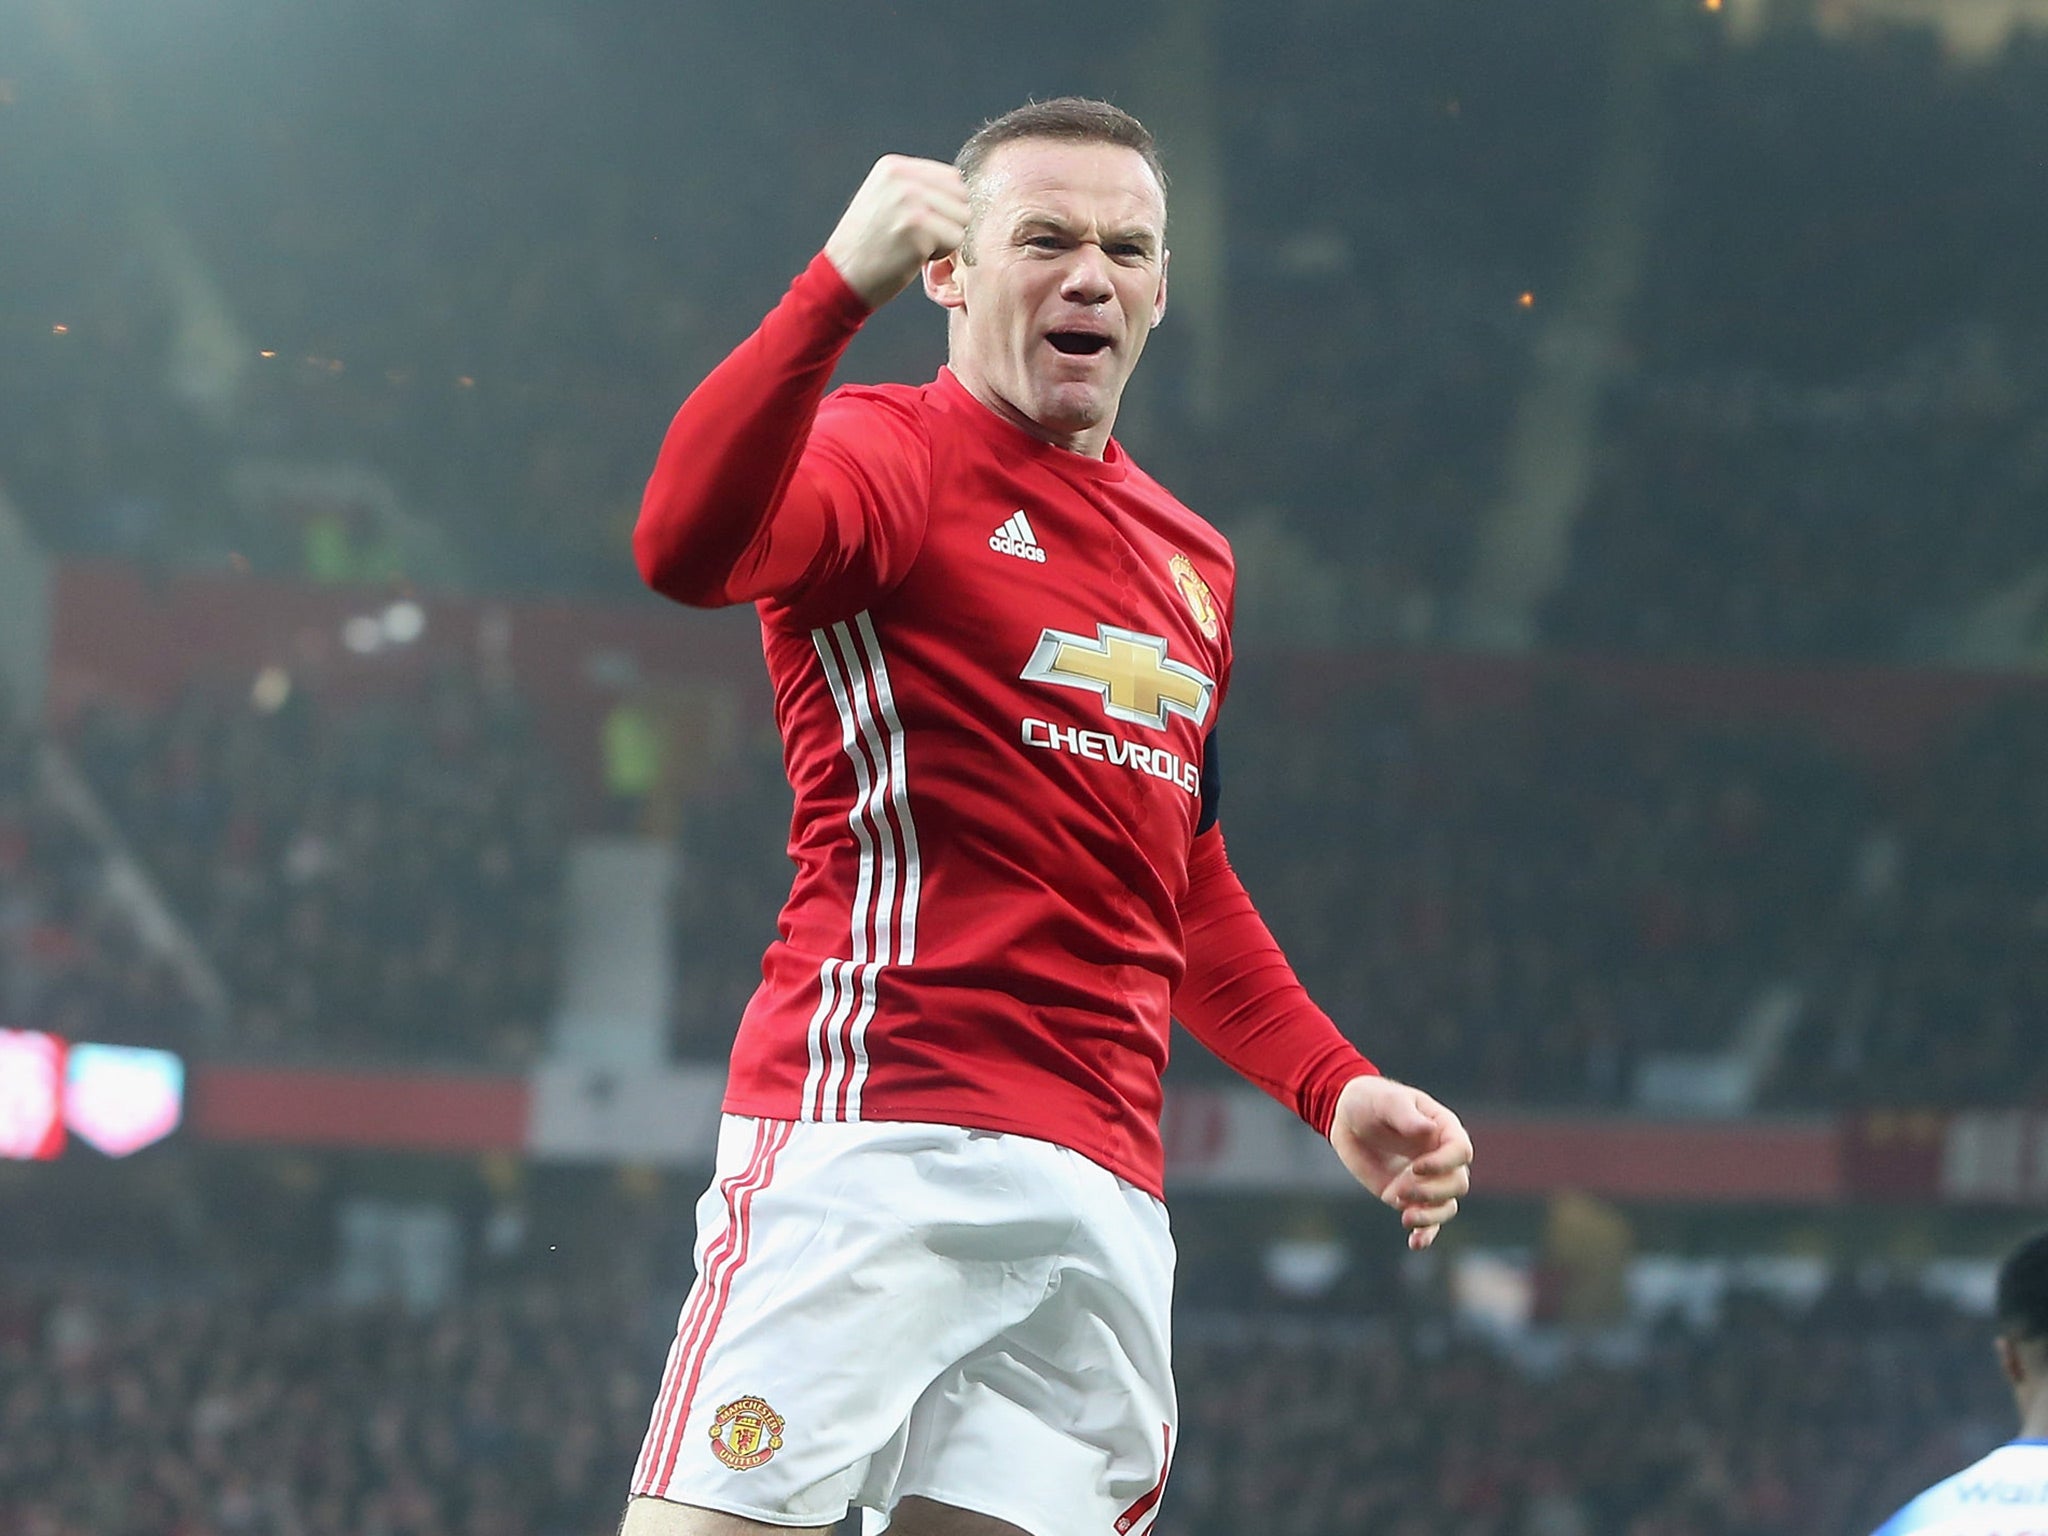 Wayne Rooney notched his 249th United goal in Saturday's FA Cup tie with Reading